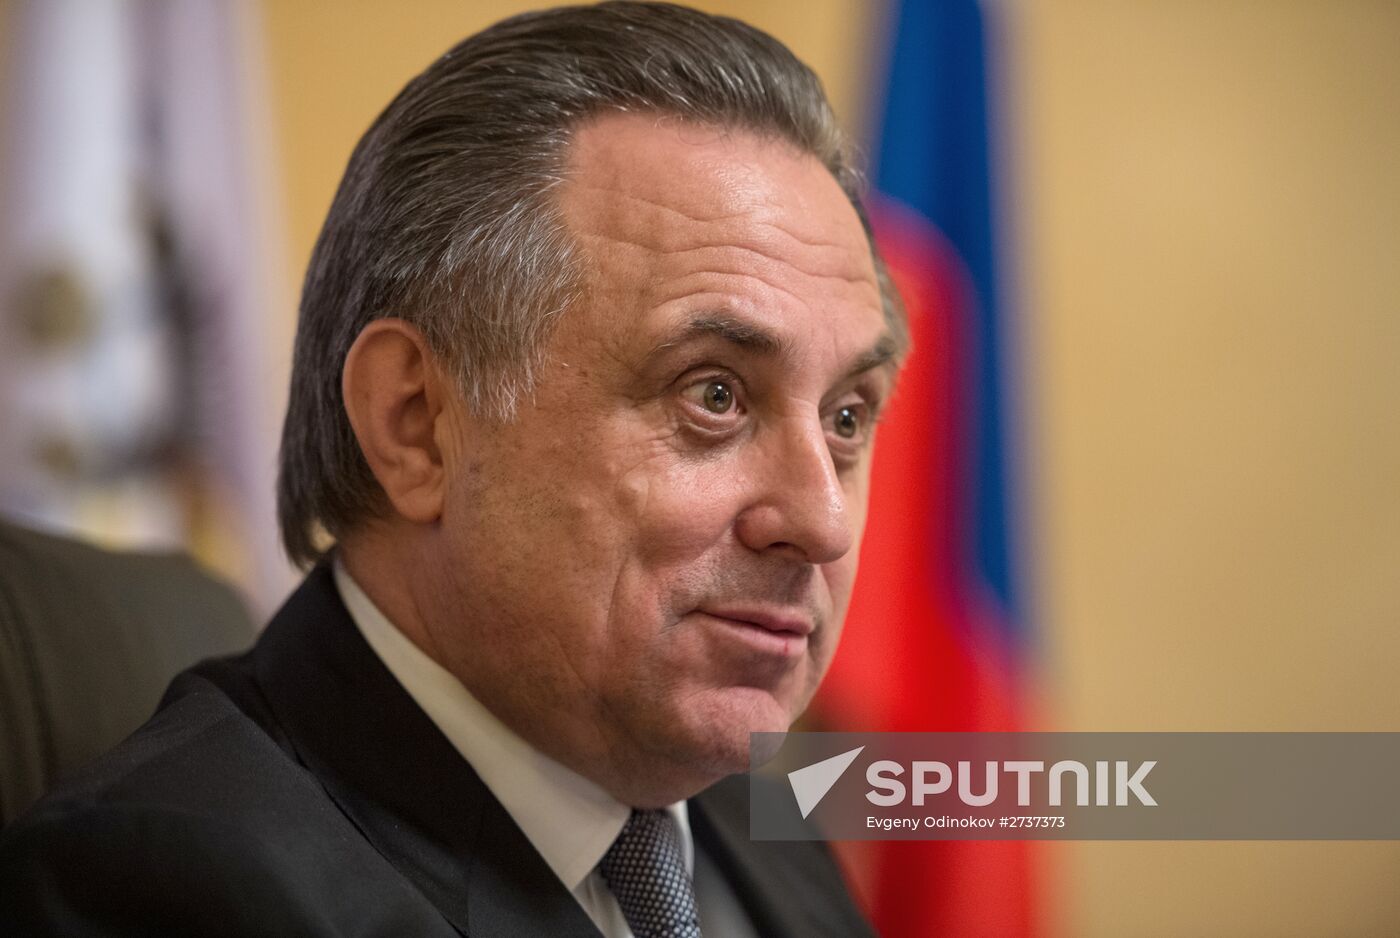 Russian Minister of Sport Vitaly Mutko gives news conference